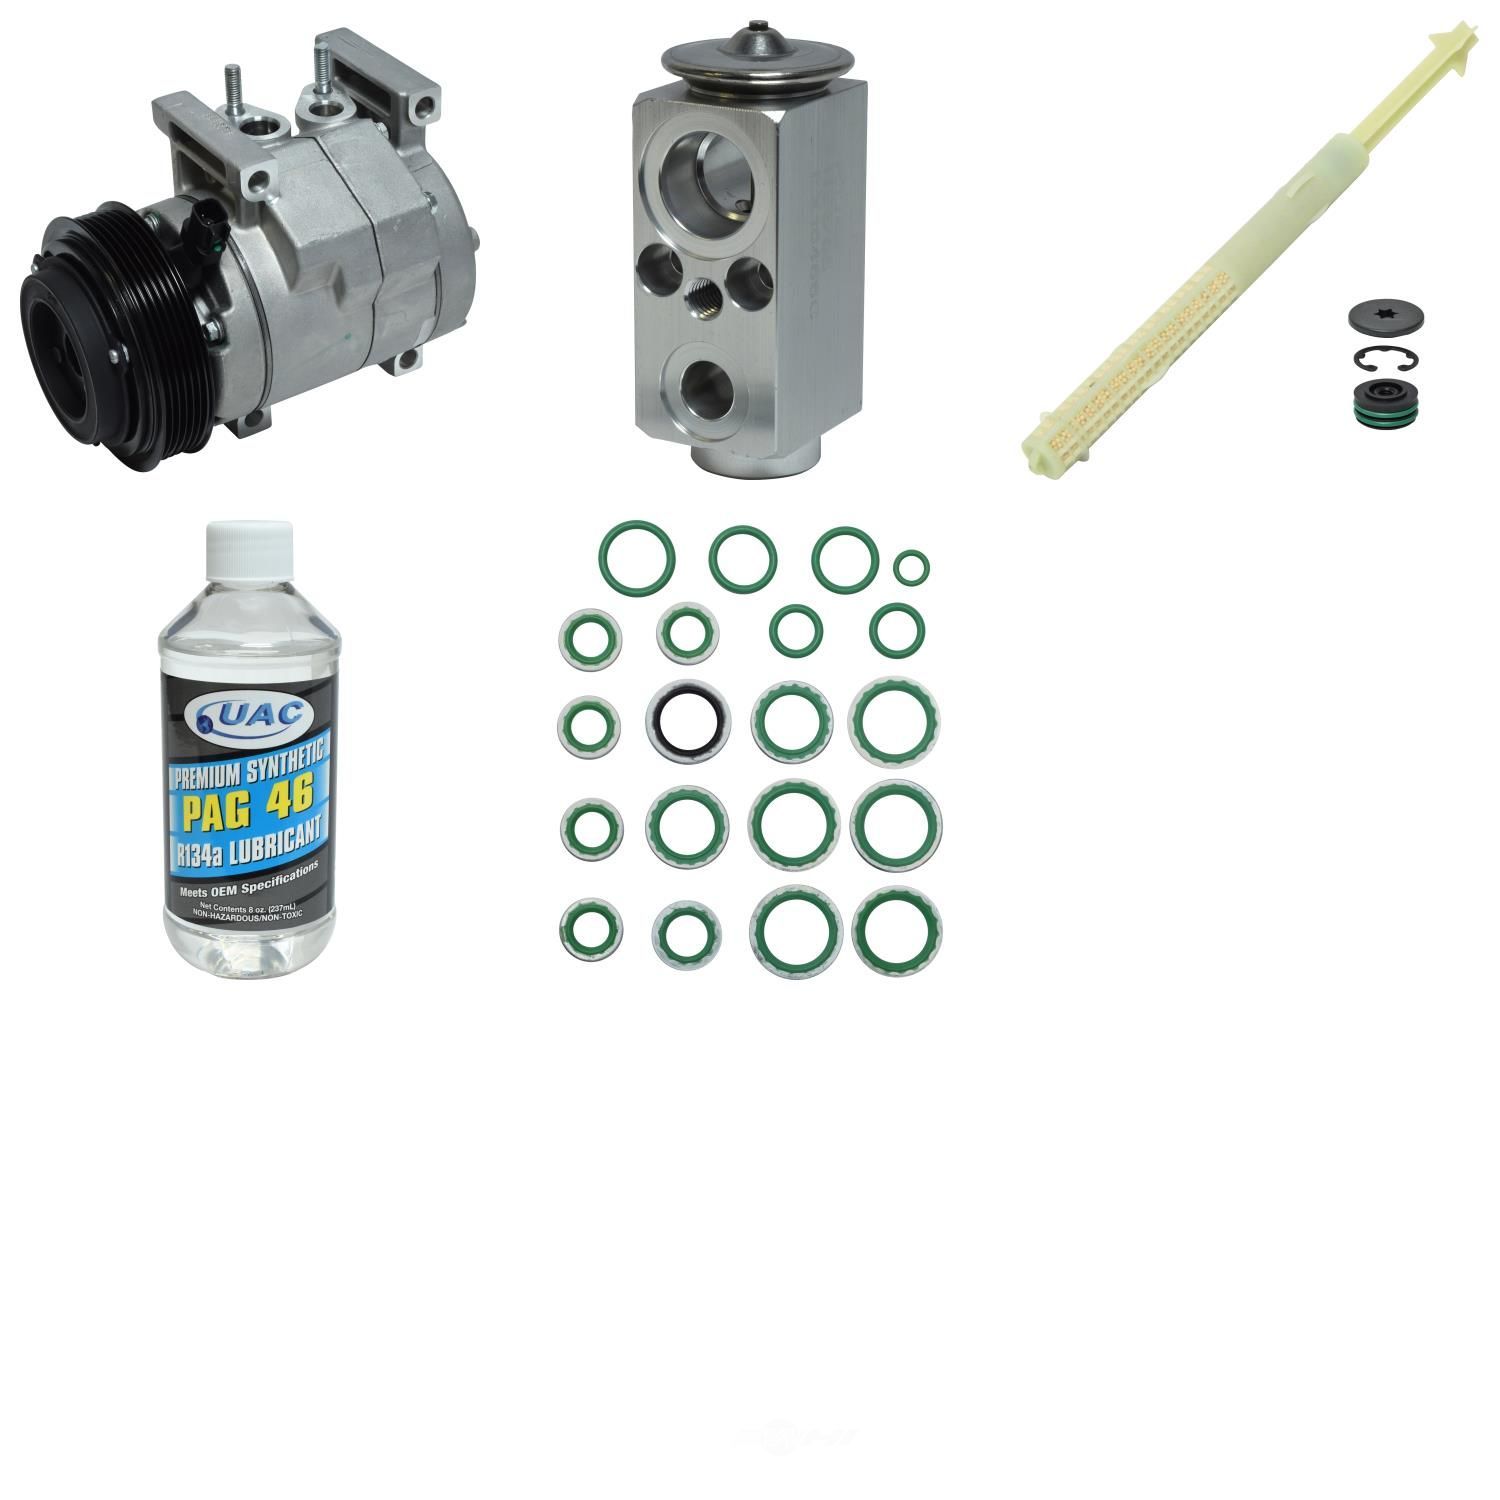 UNIVERSAL AIR CONDITIONER, INC. - Compressor Replacement Kit - UAC KT 5428